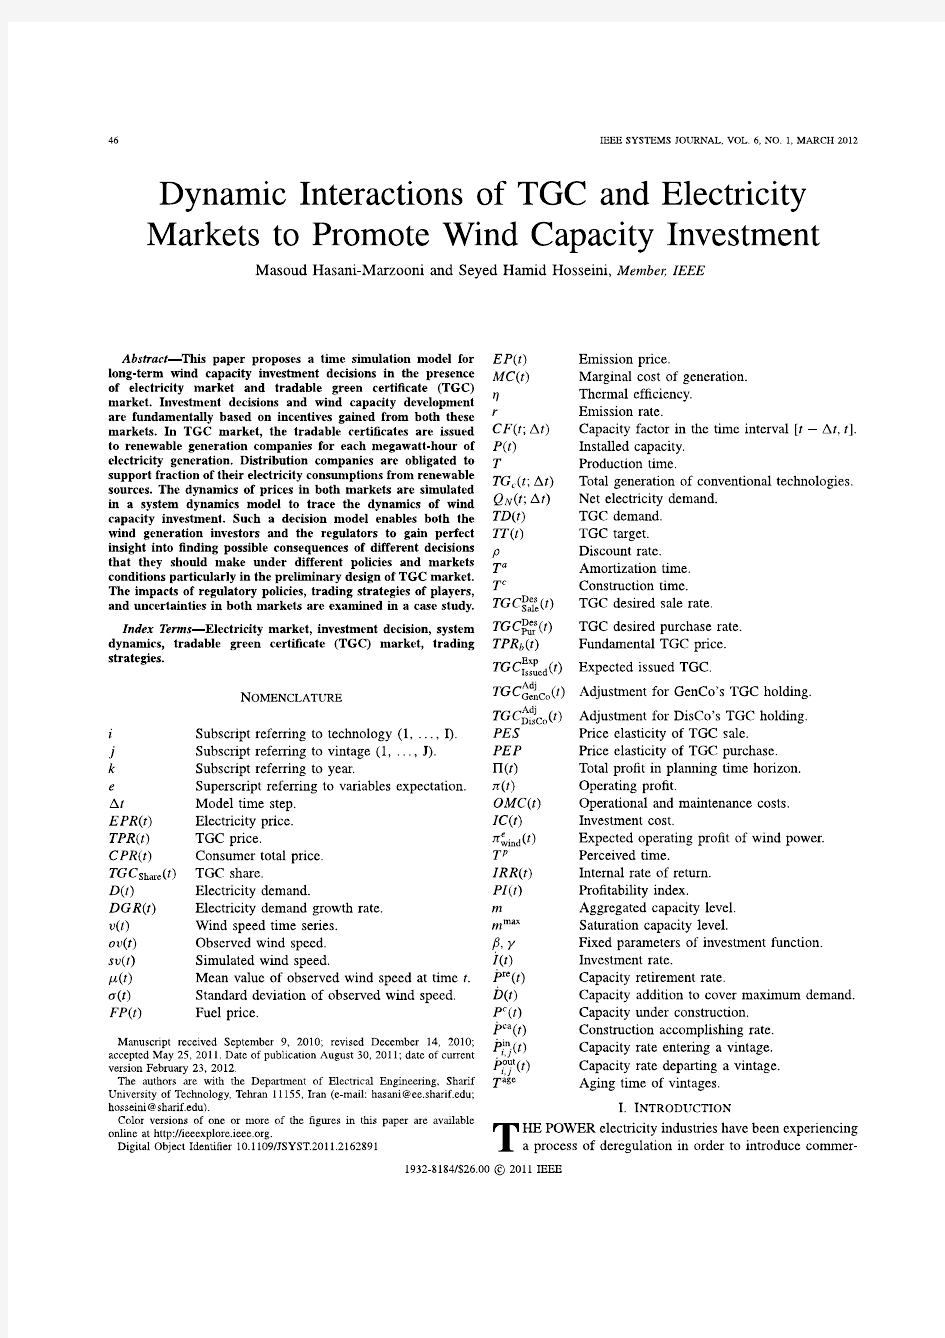 Dynamic Interaction of TGC and Electricity Markets to Promote Wind Capacity Investment